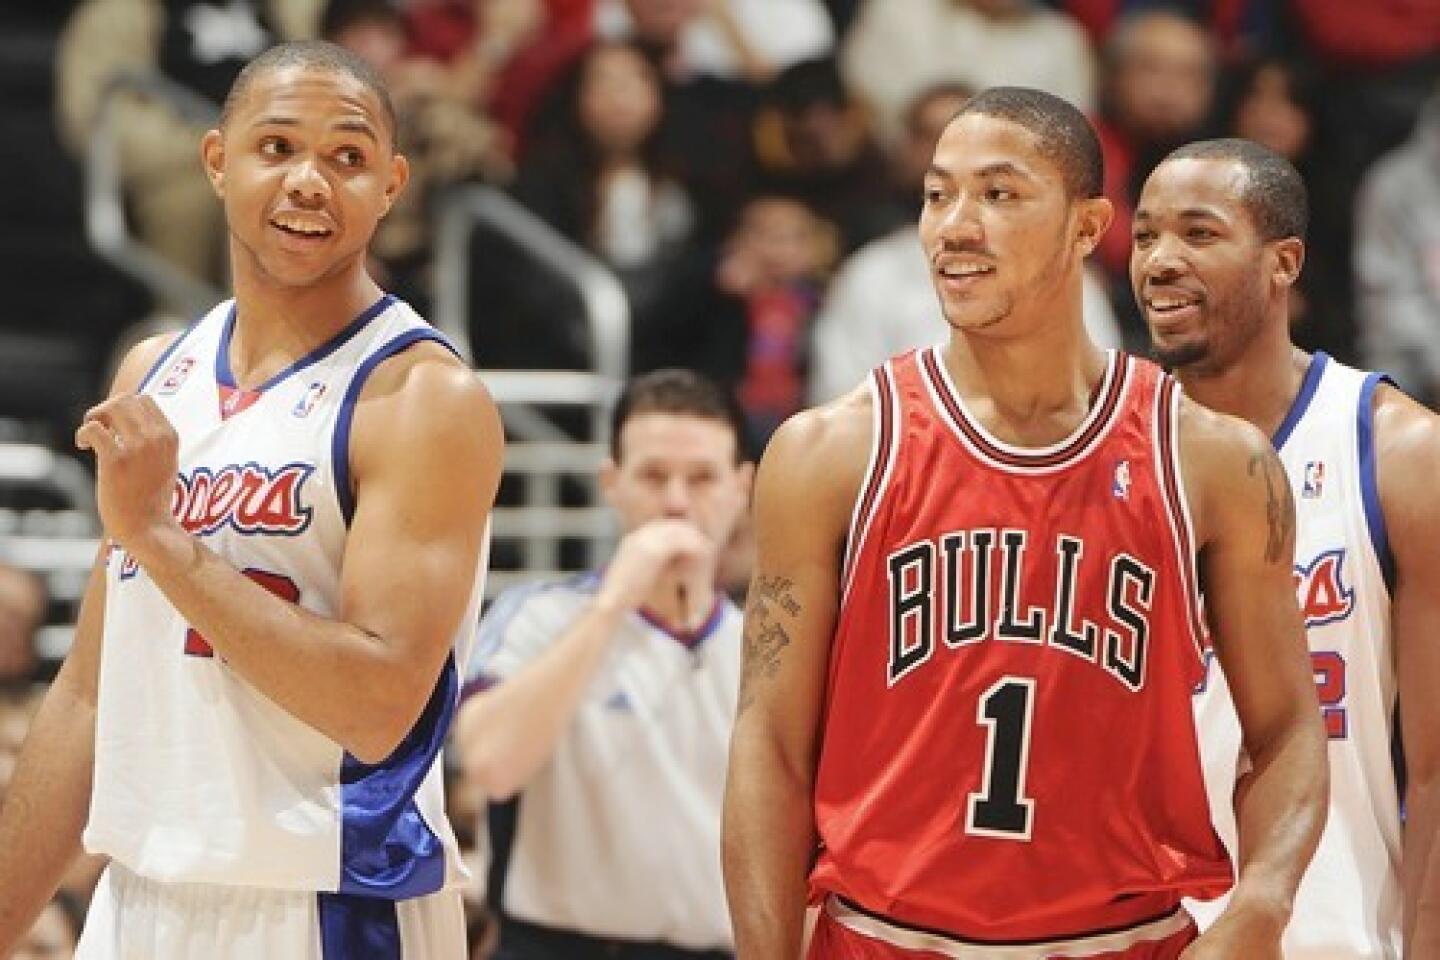 Top Moments: Derrick Rose becomes youngest player to win MVP